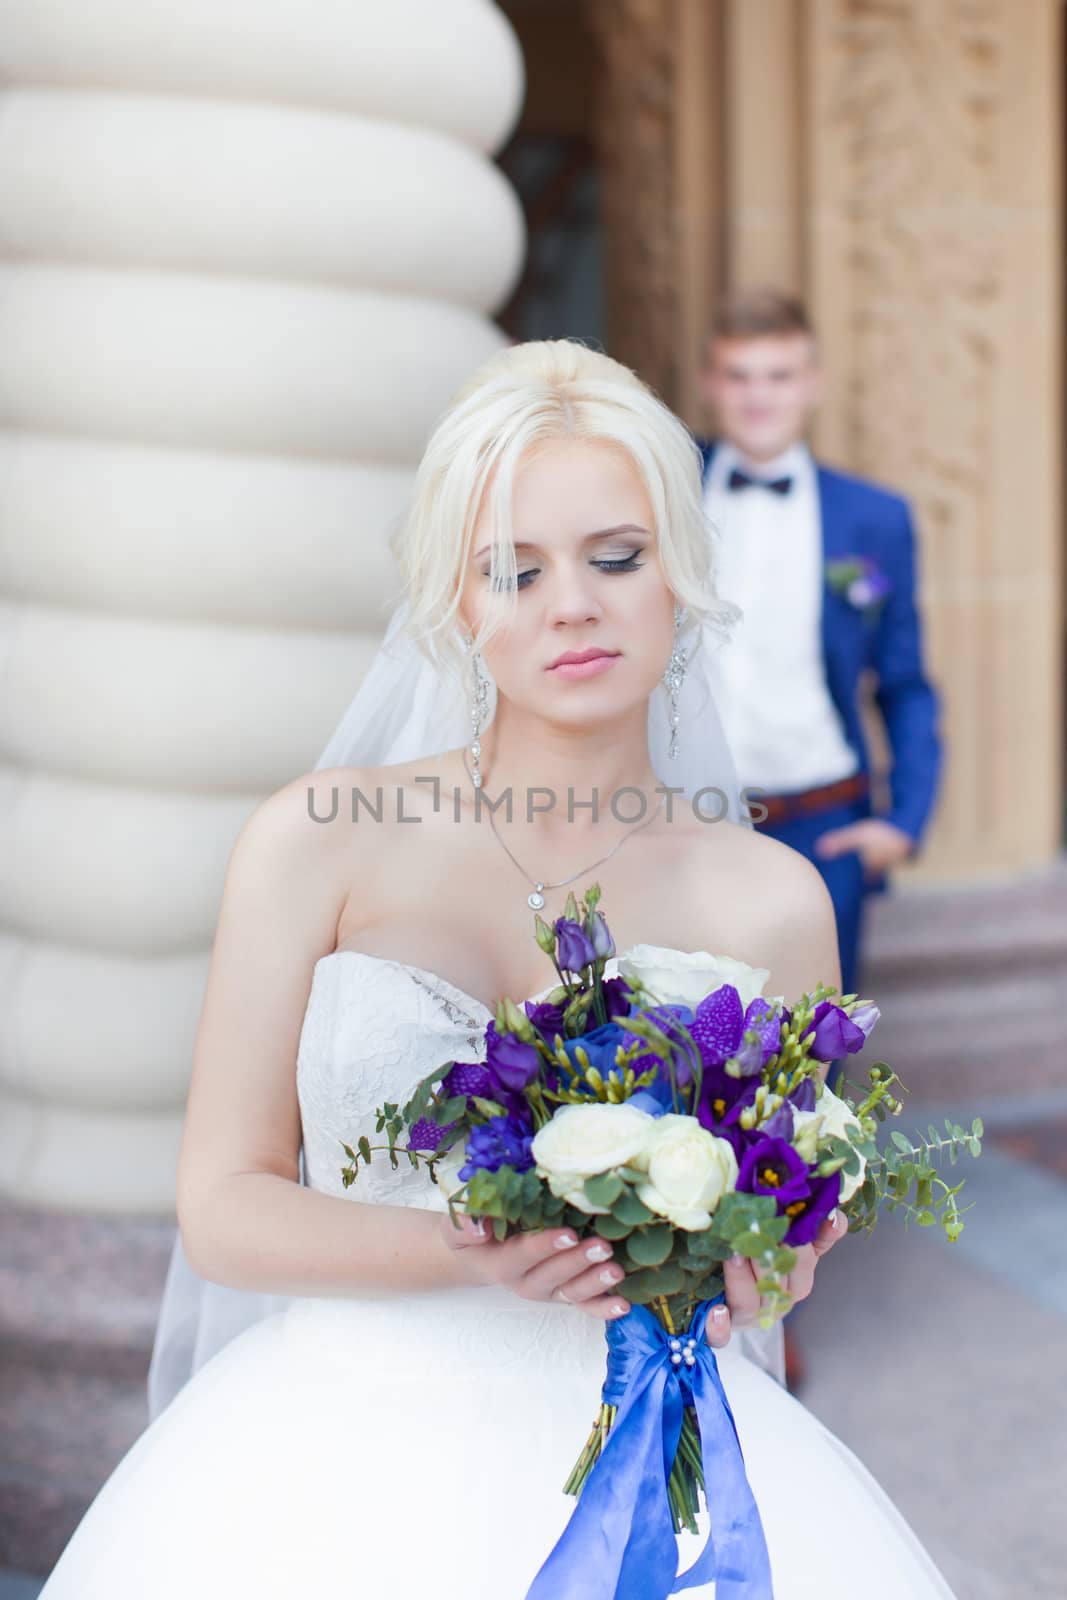 The blonde the bride with a bouquet in hands, on a background the groom in a blue suit. Wedding day.